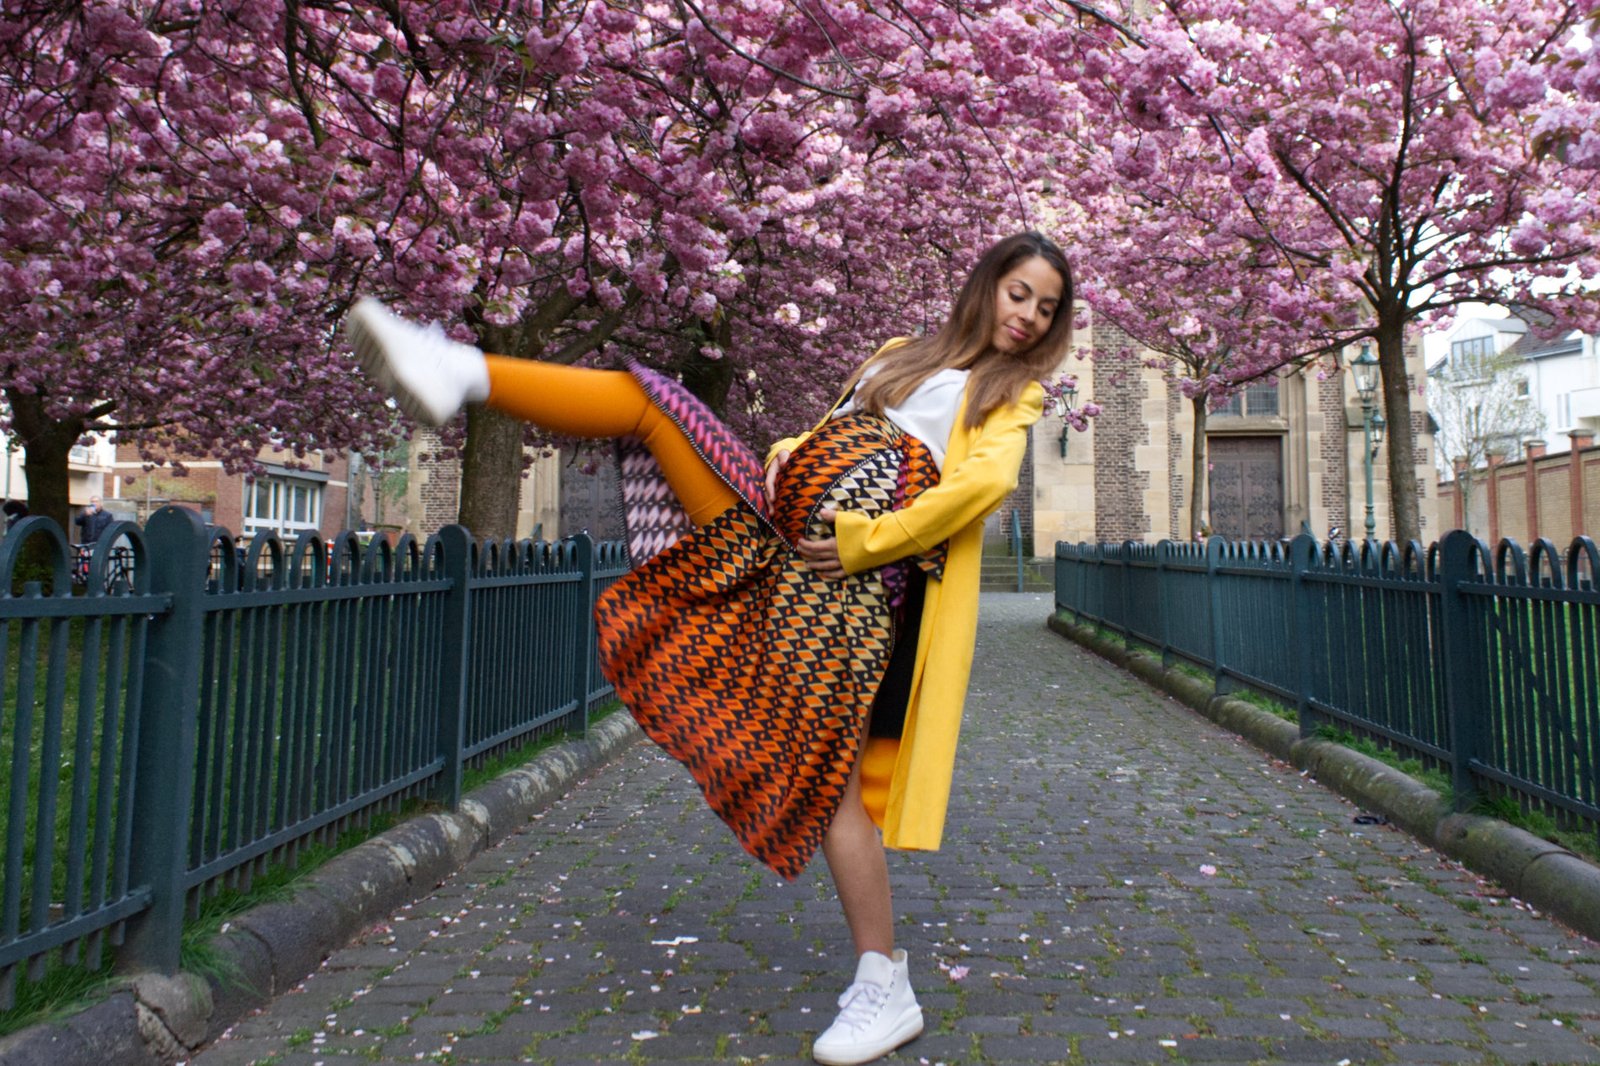 Carmen Mar with colorful dress and pregnant body dancing pose in front of cherry blossom trees